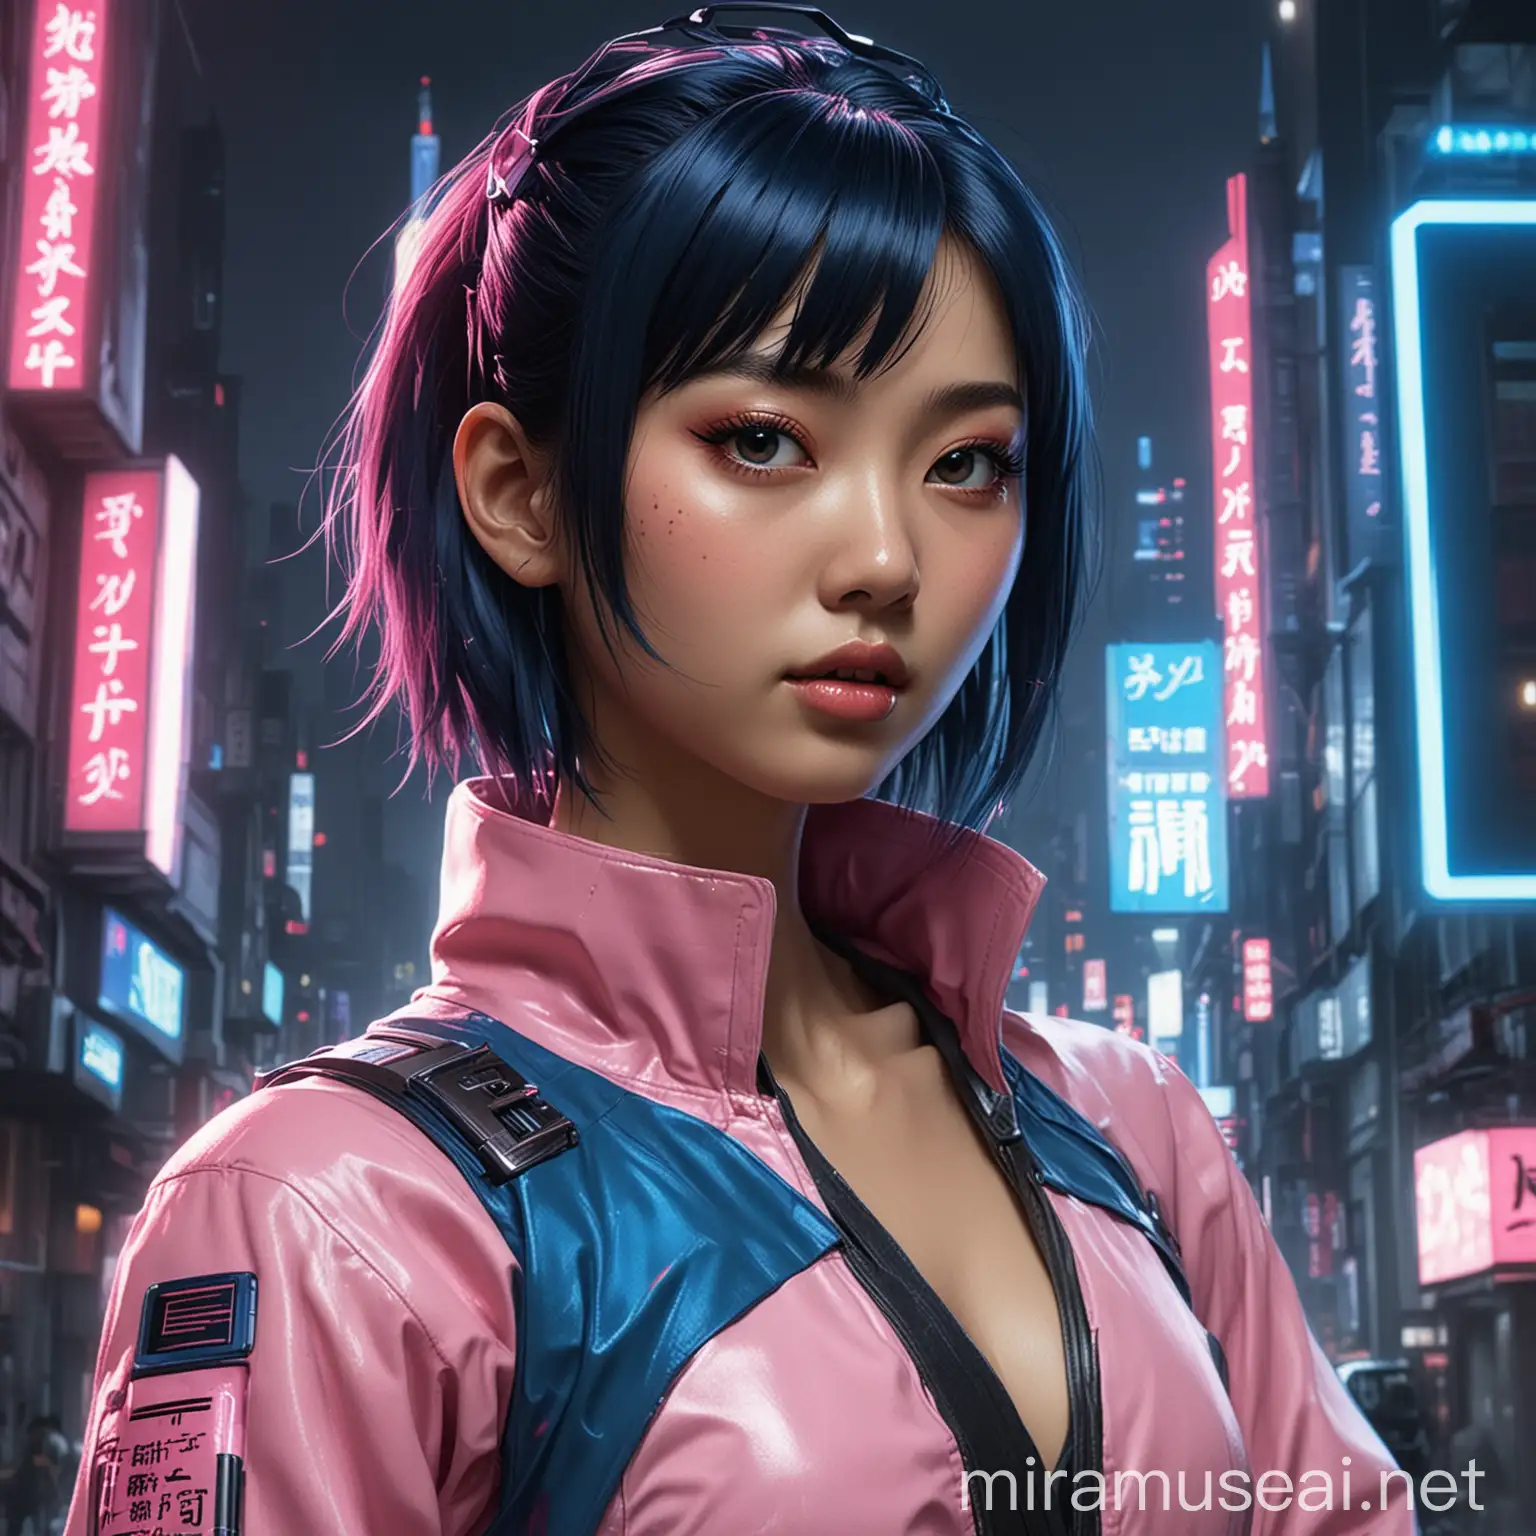 help me create an asian women pfp in the theme of futuristic neo tokyo using the colors blue and pink. 